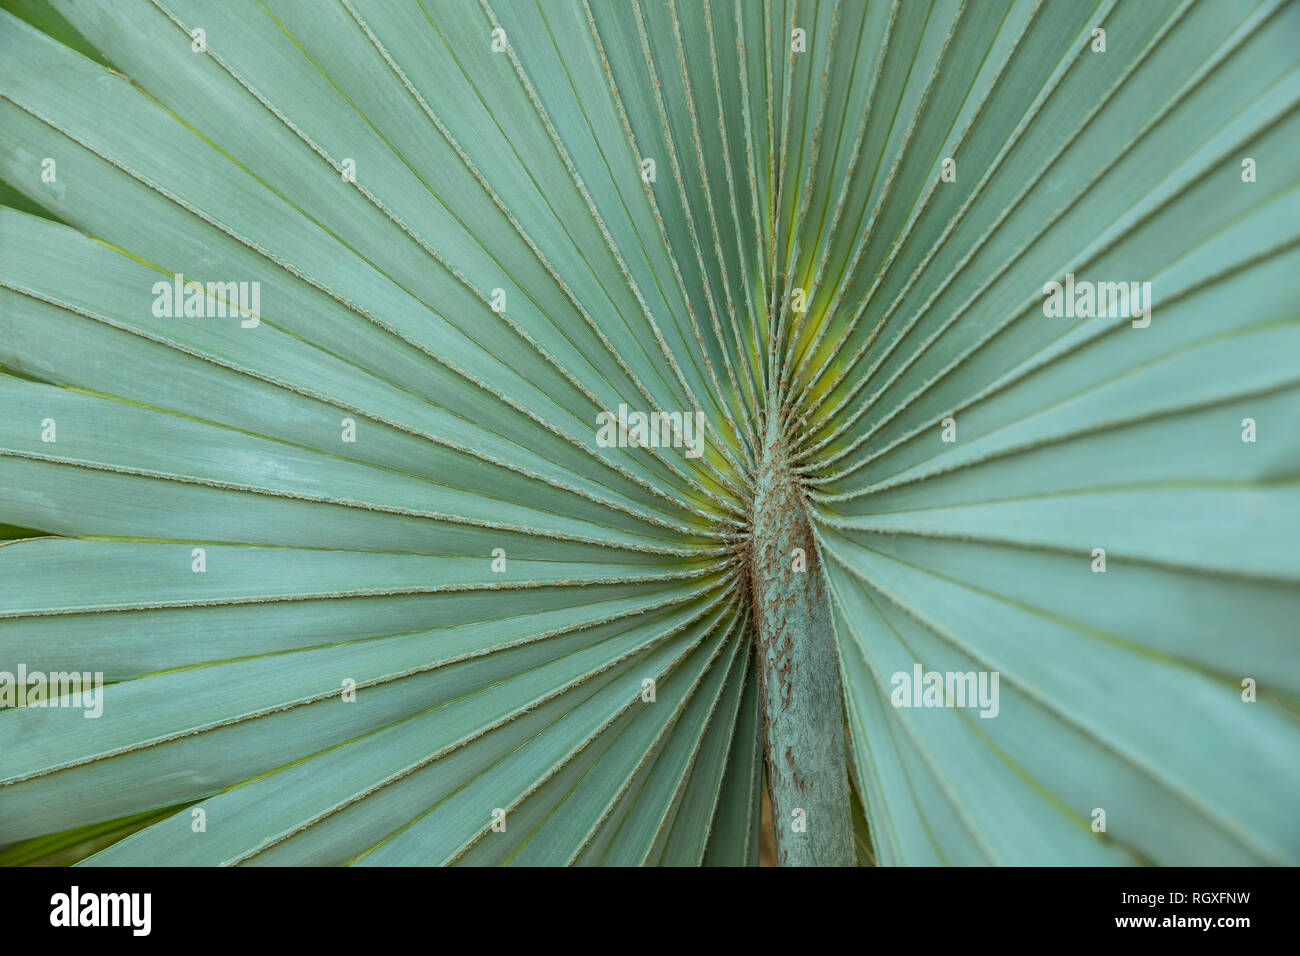 A tropical green leaf close up, graphic, textured shape Stock Photo